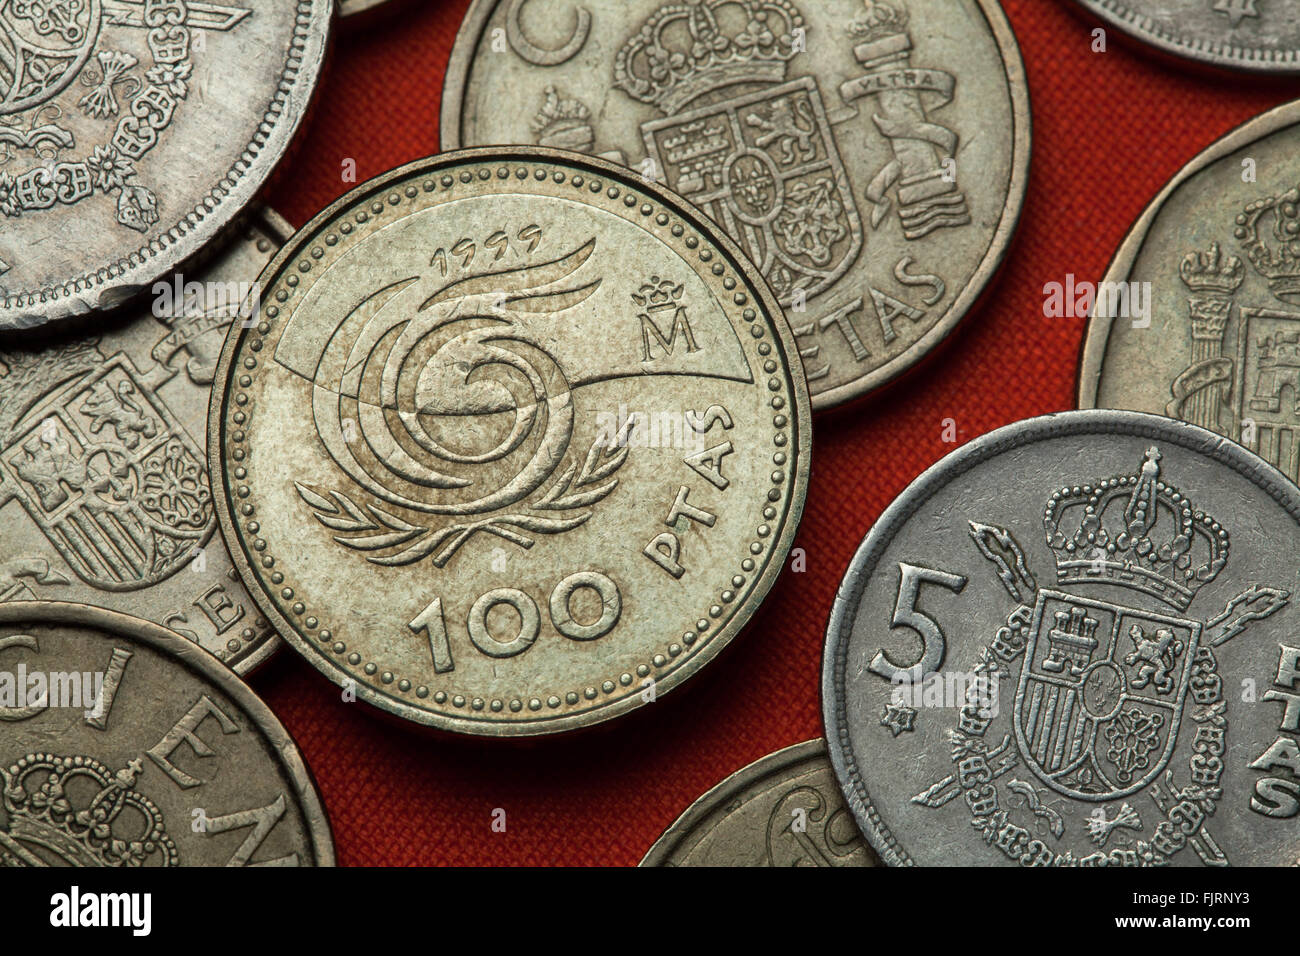 Coins of Spain. Emblem for the 1999 International Year of the Older Persons depicted in the Spanish 100 peseta coin (1999). Stock Photo